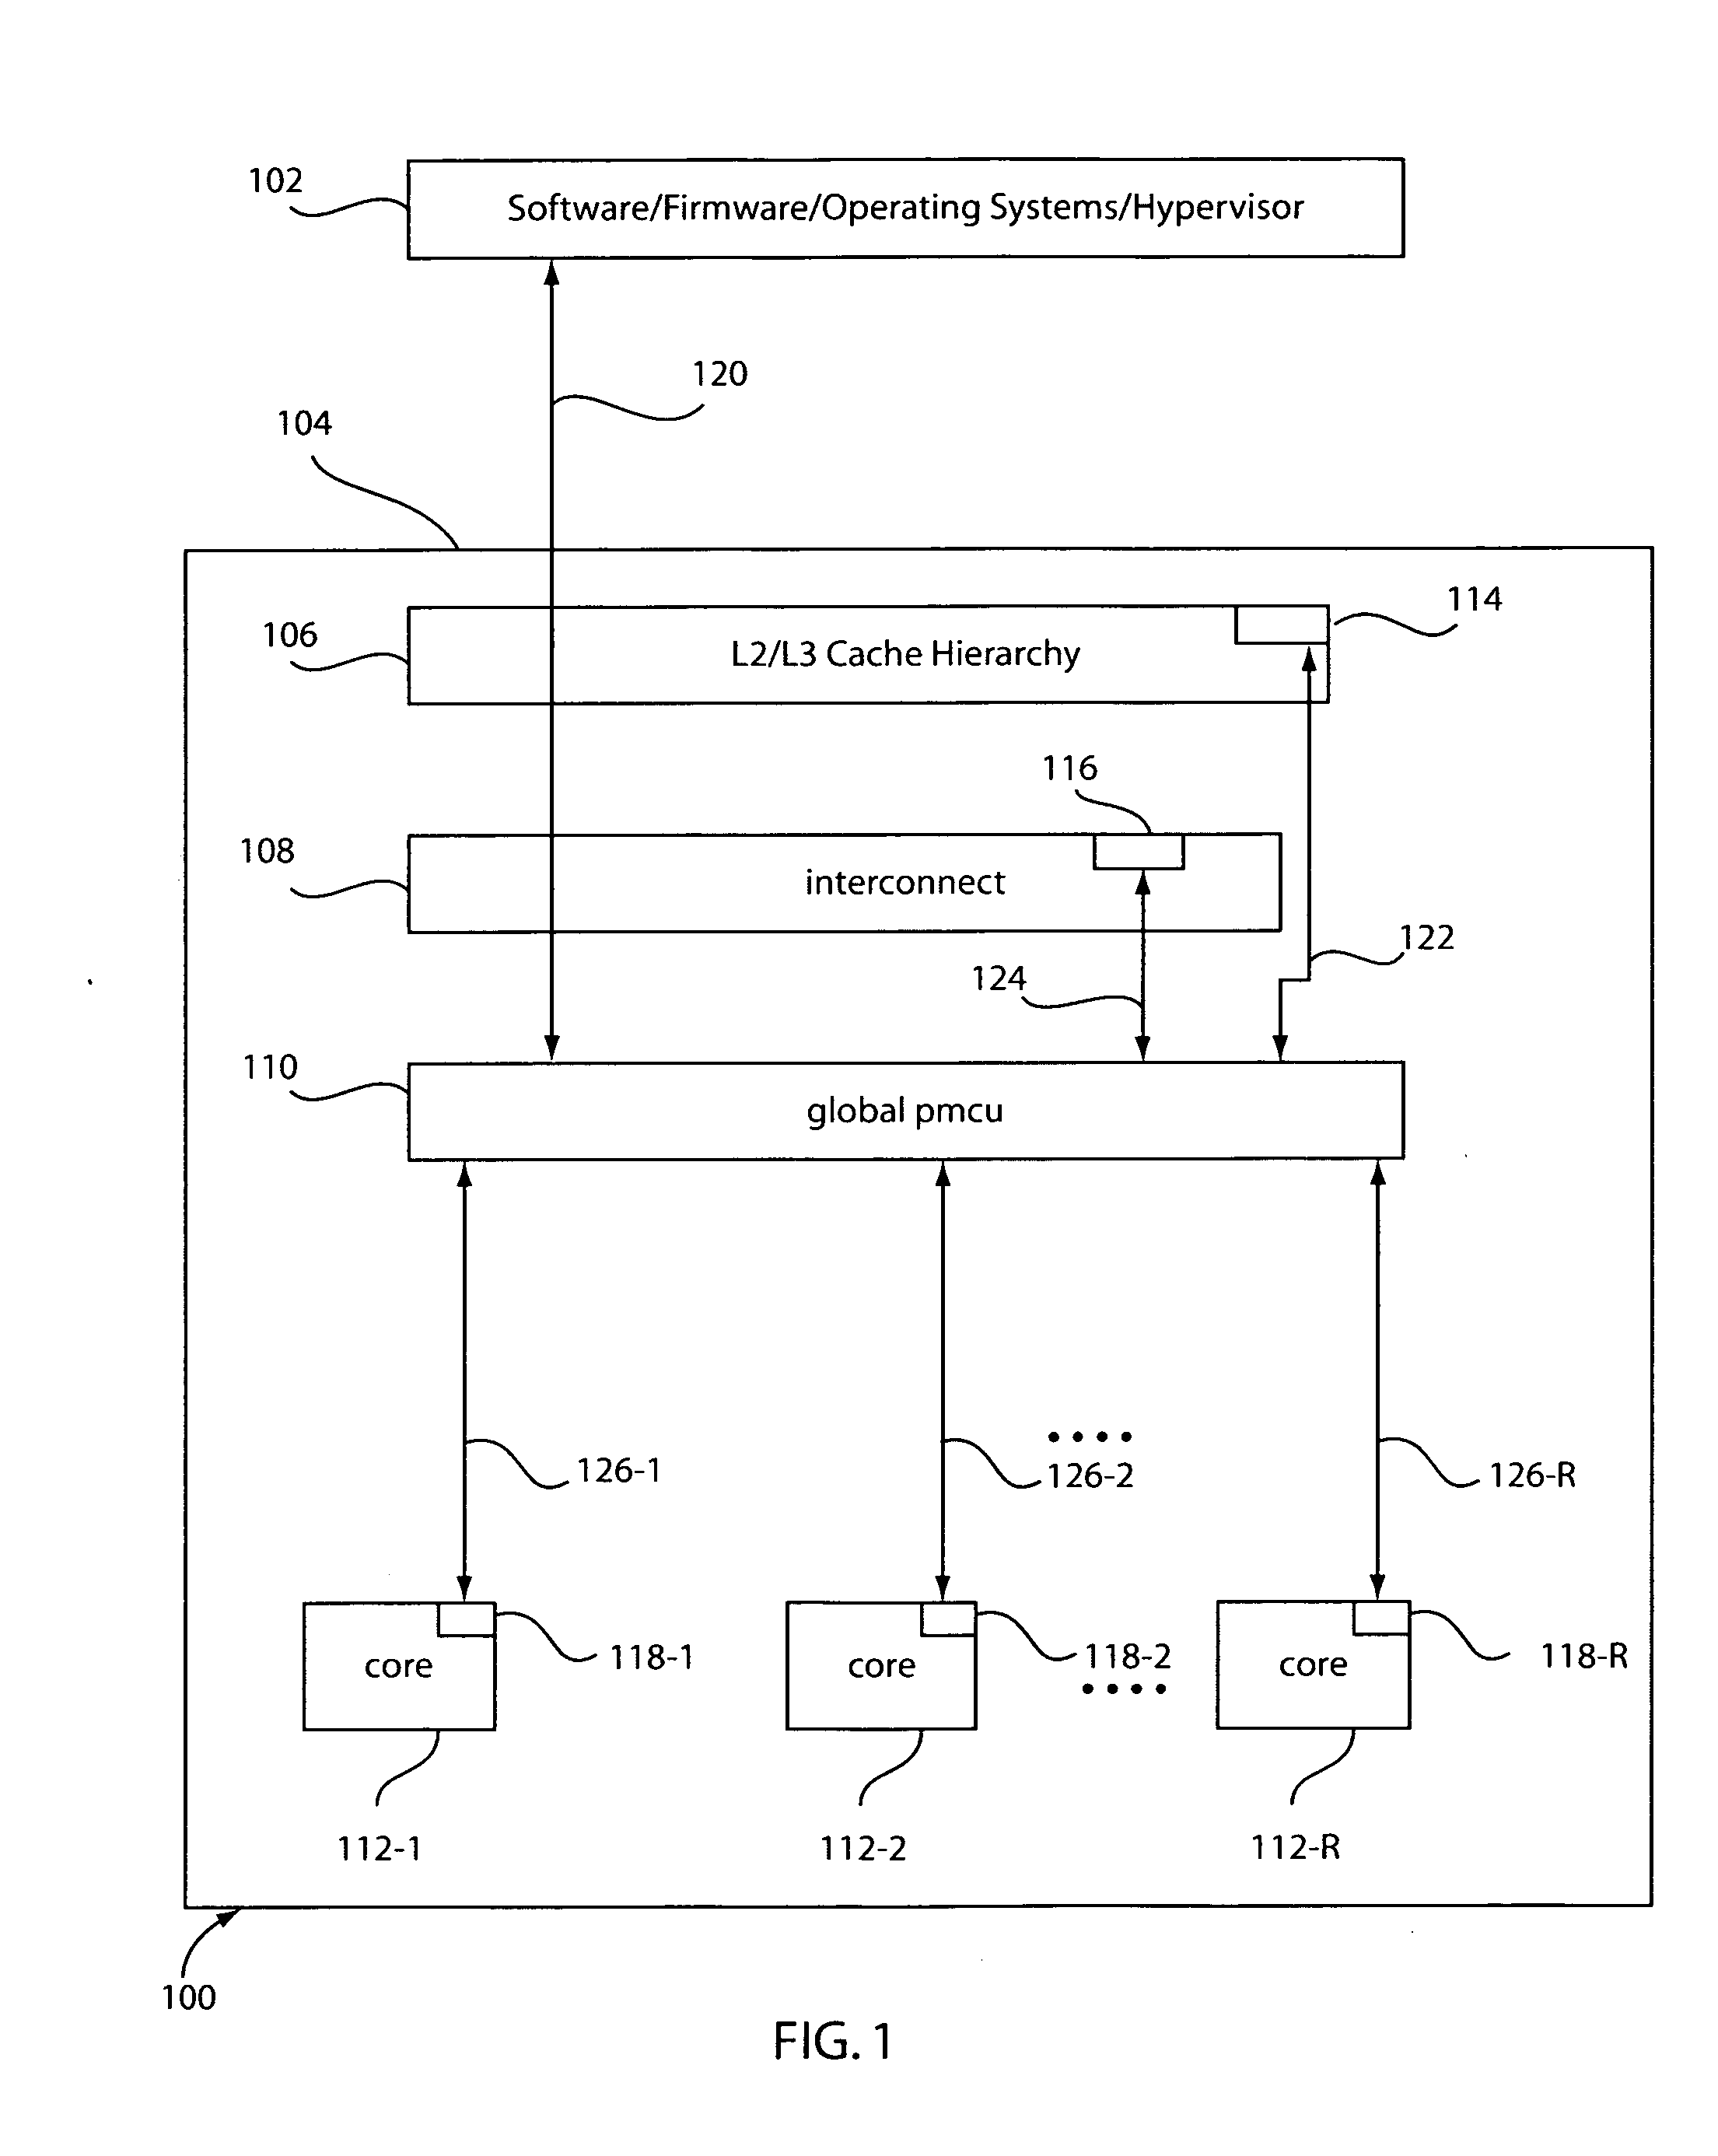 Method and system for controlling power in a chip through a power-performance monitor and control unit